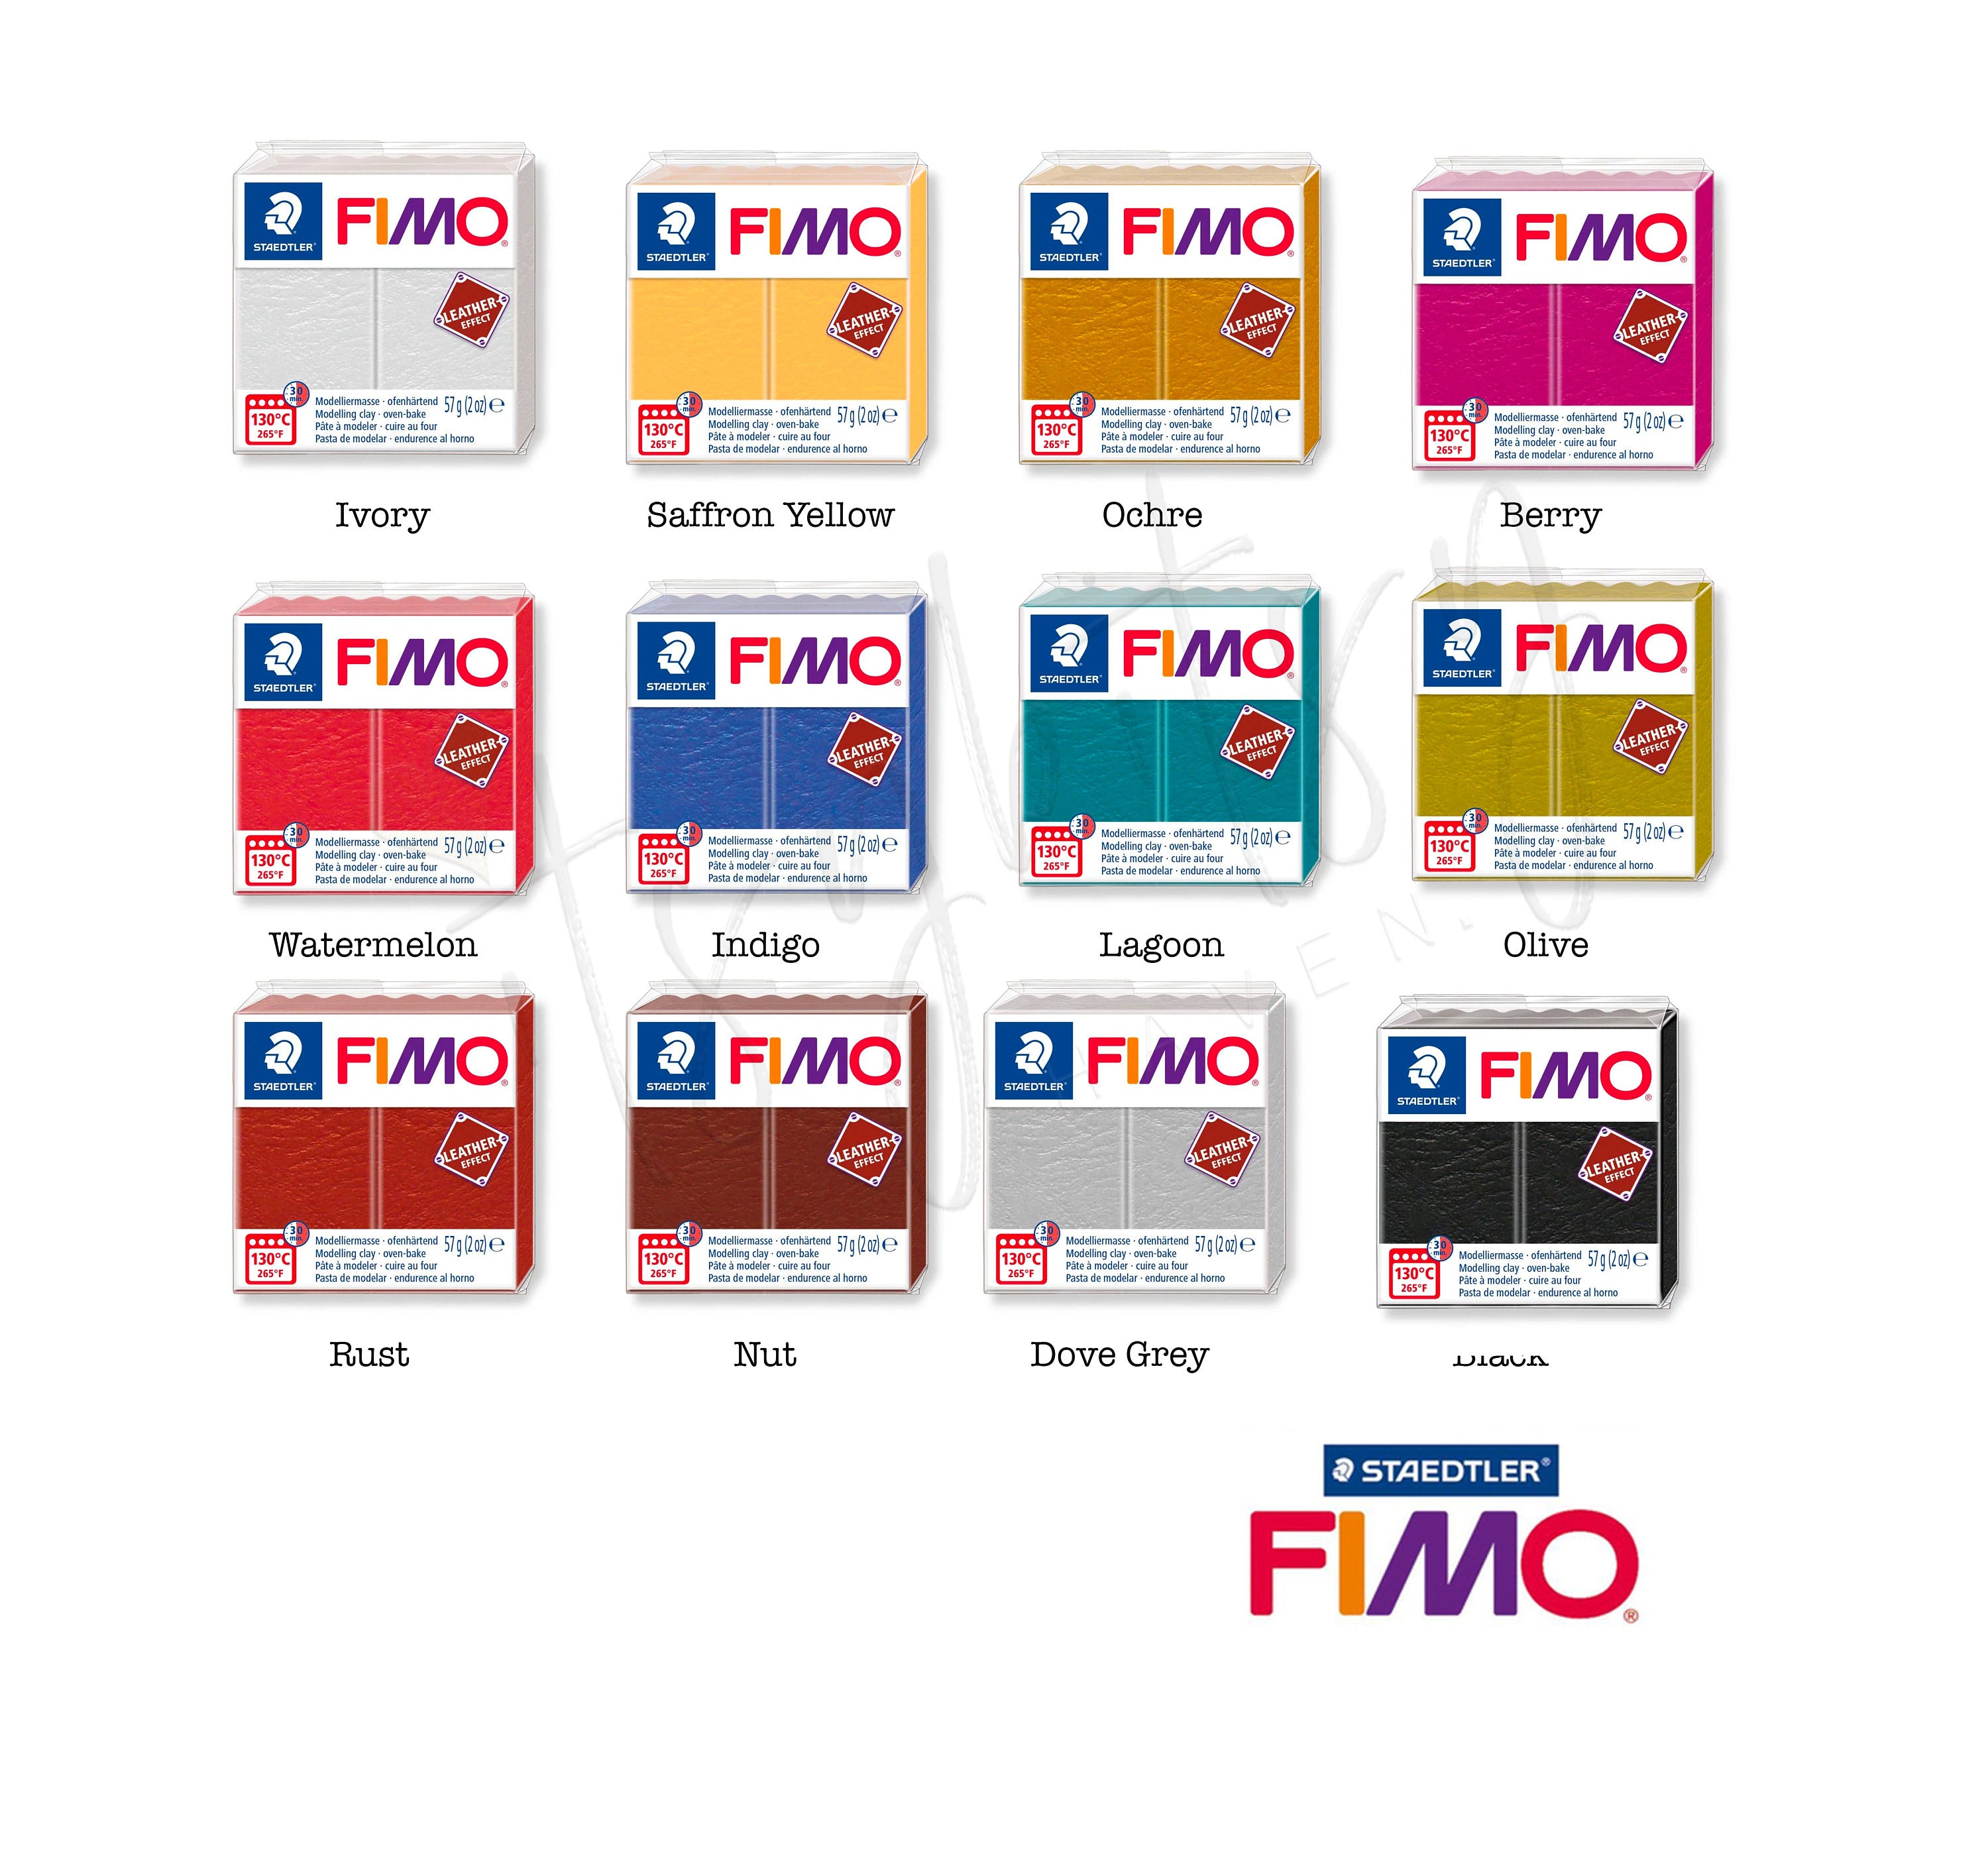 FIMO LEATHER EFFECT 57 g (2 oz) Polymer Clay - Choose your colour